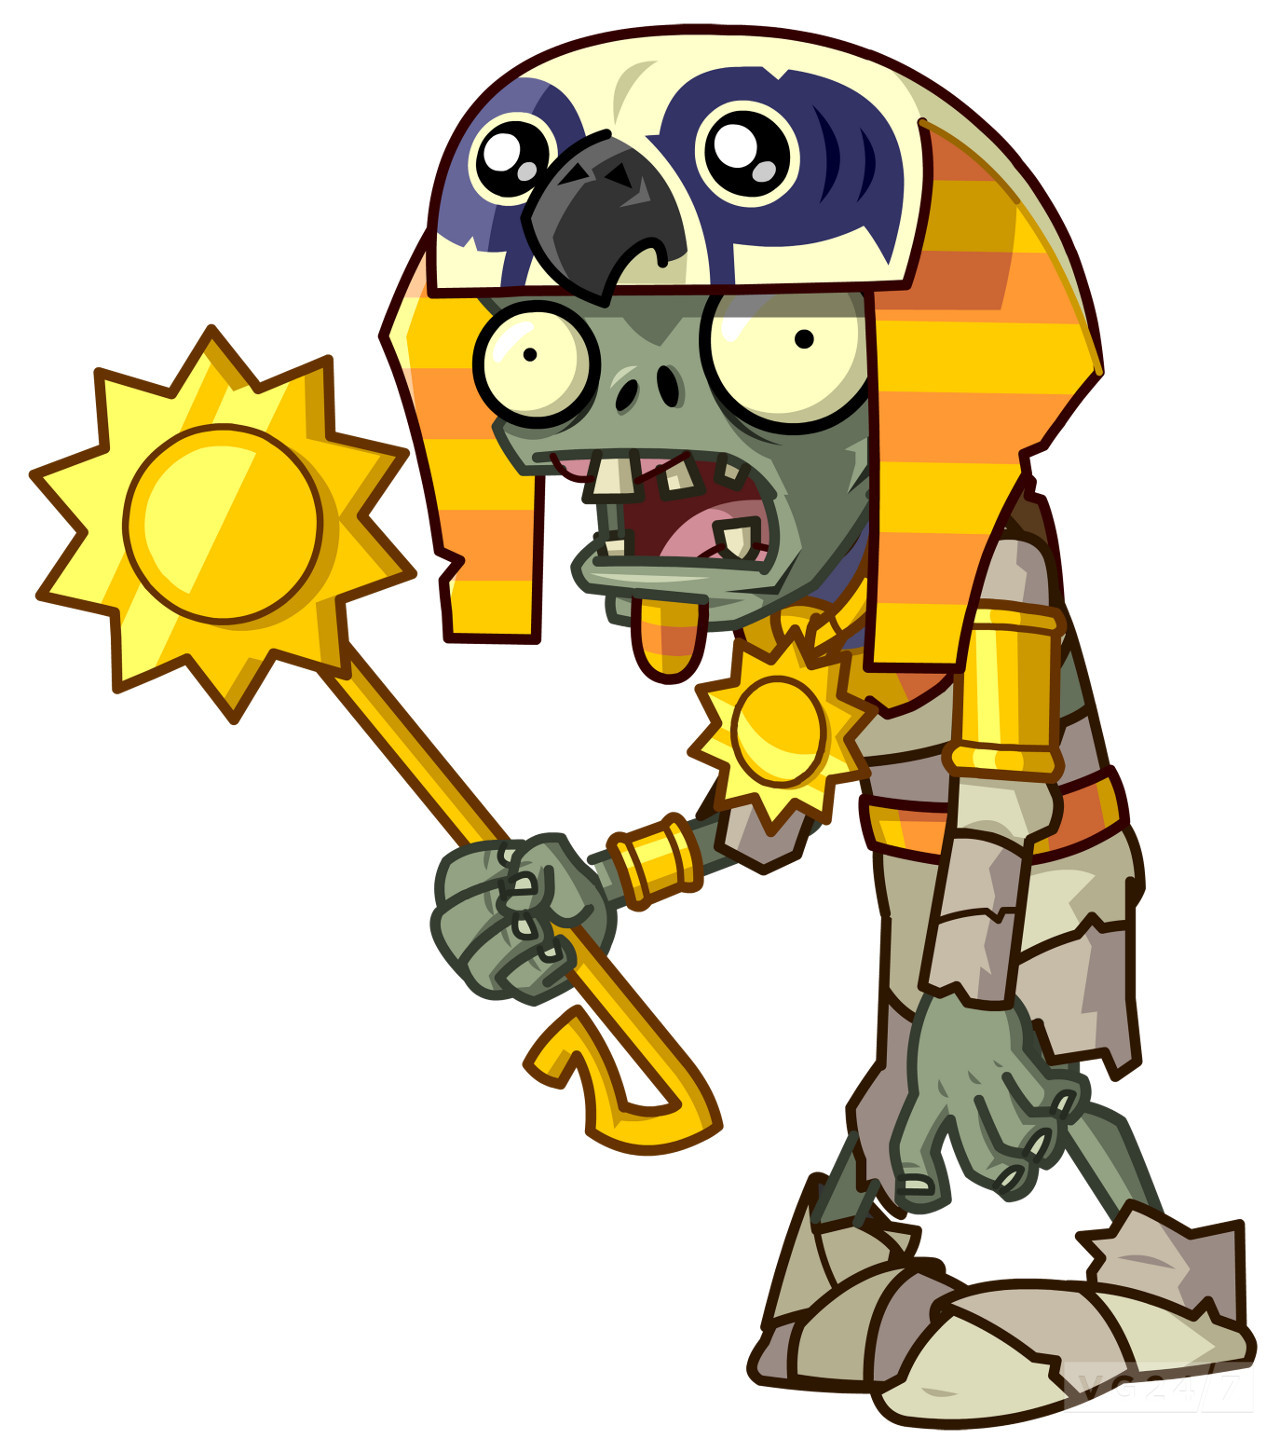 Why I'm Not Playing Plants vs. Zombies 2